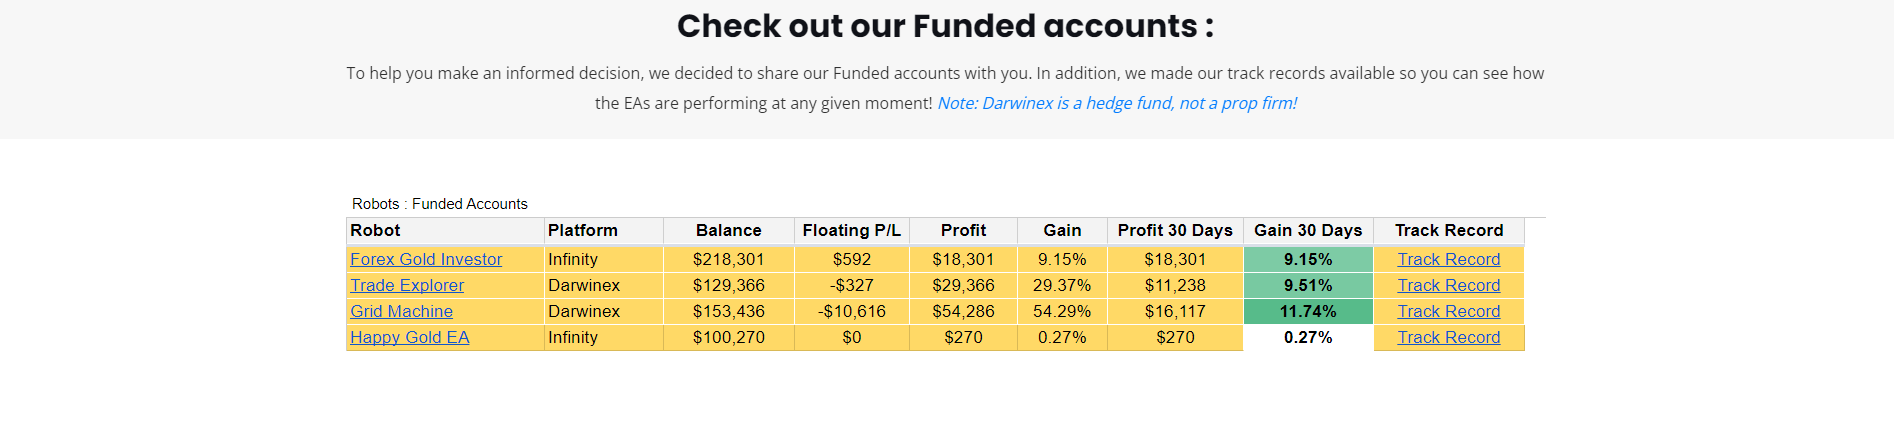 Funded Accounts Results Table